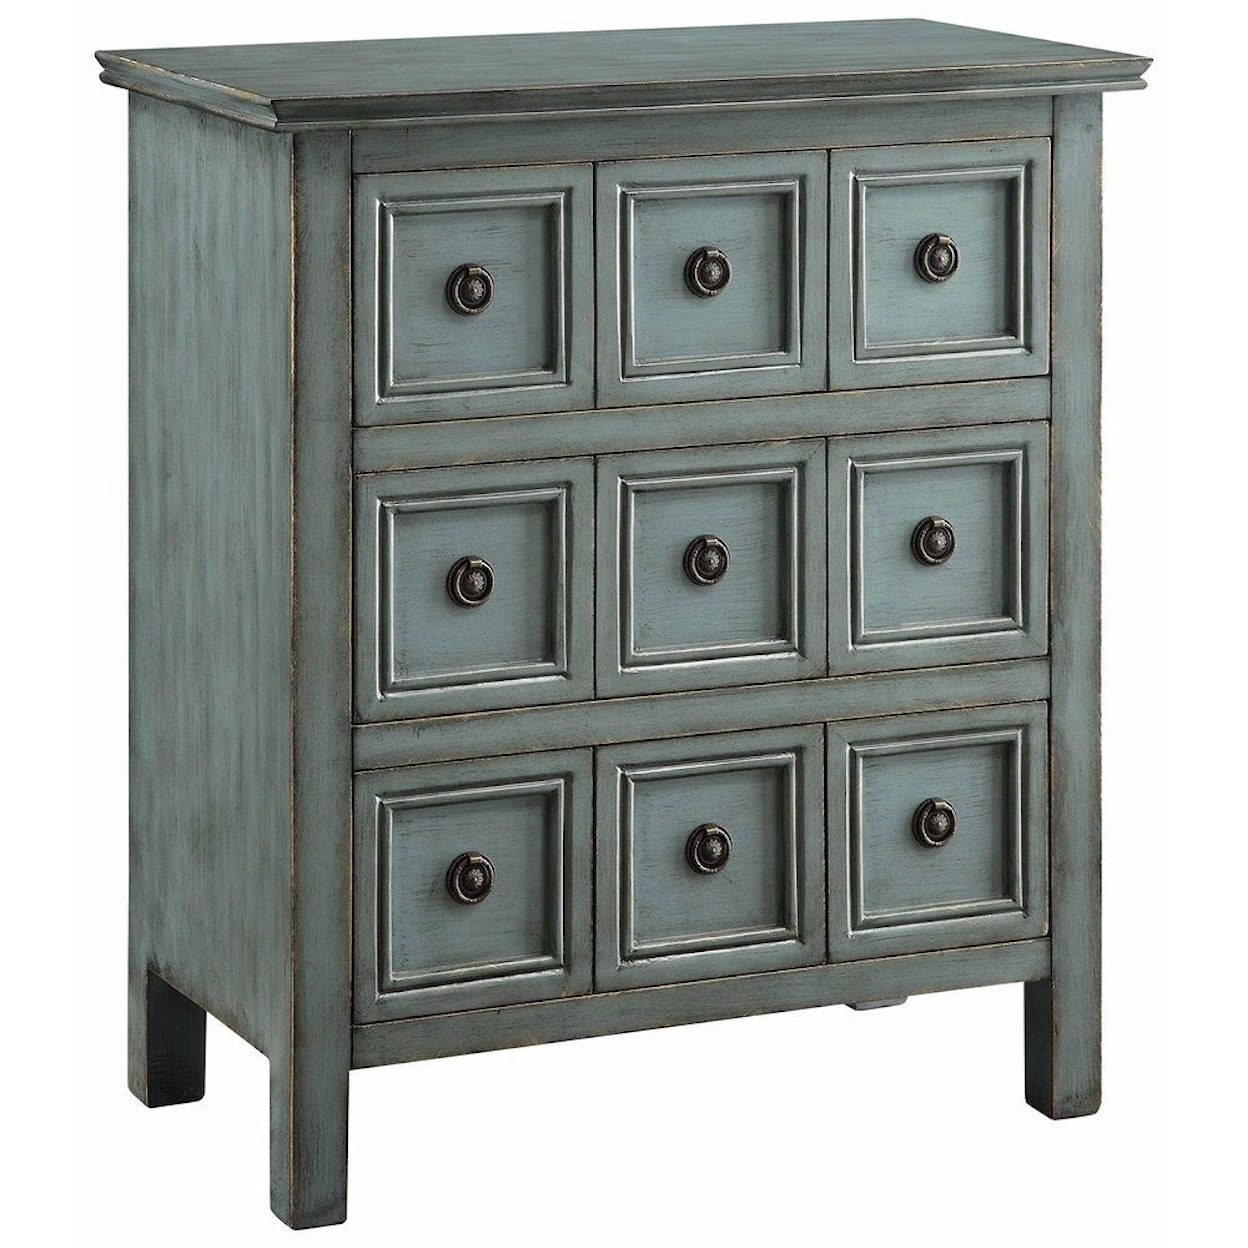 Crestview Collection Accent Furniture Florence Teal 3 Drawer Chest